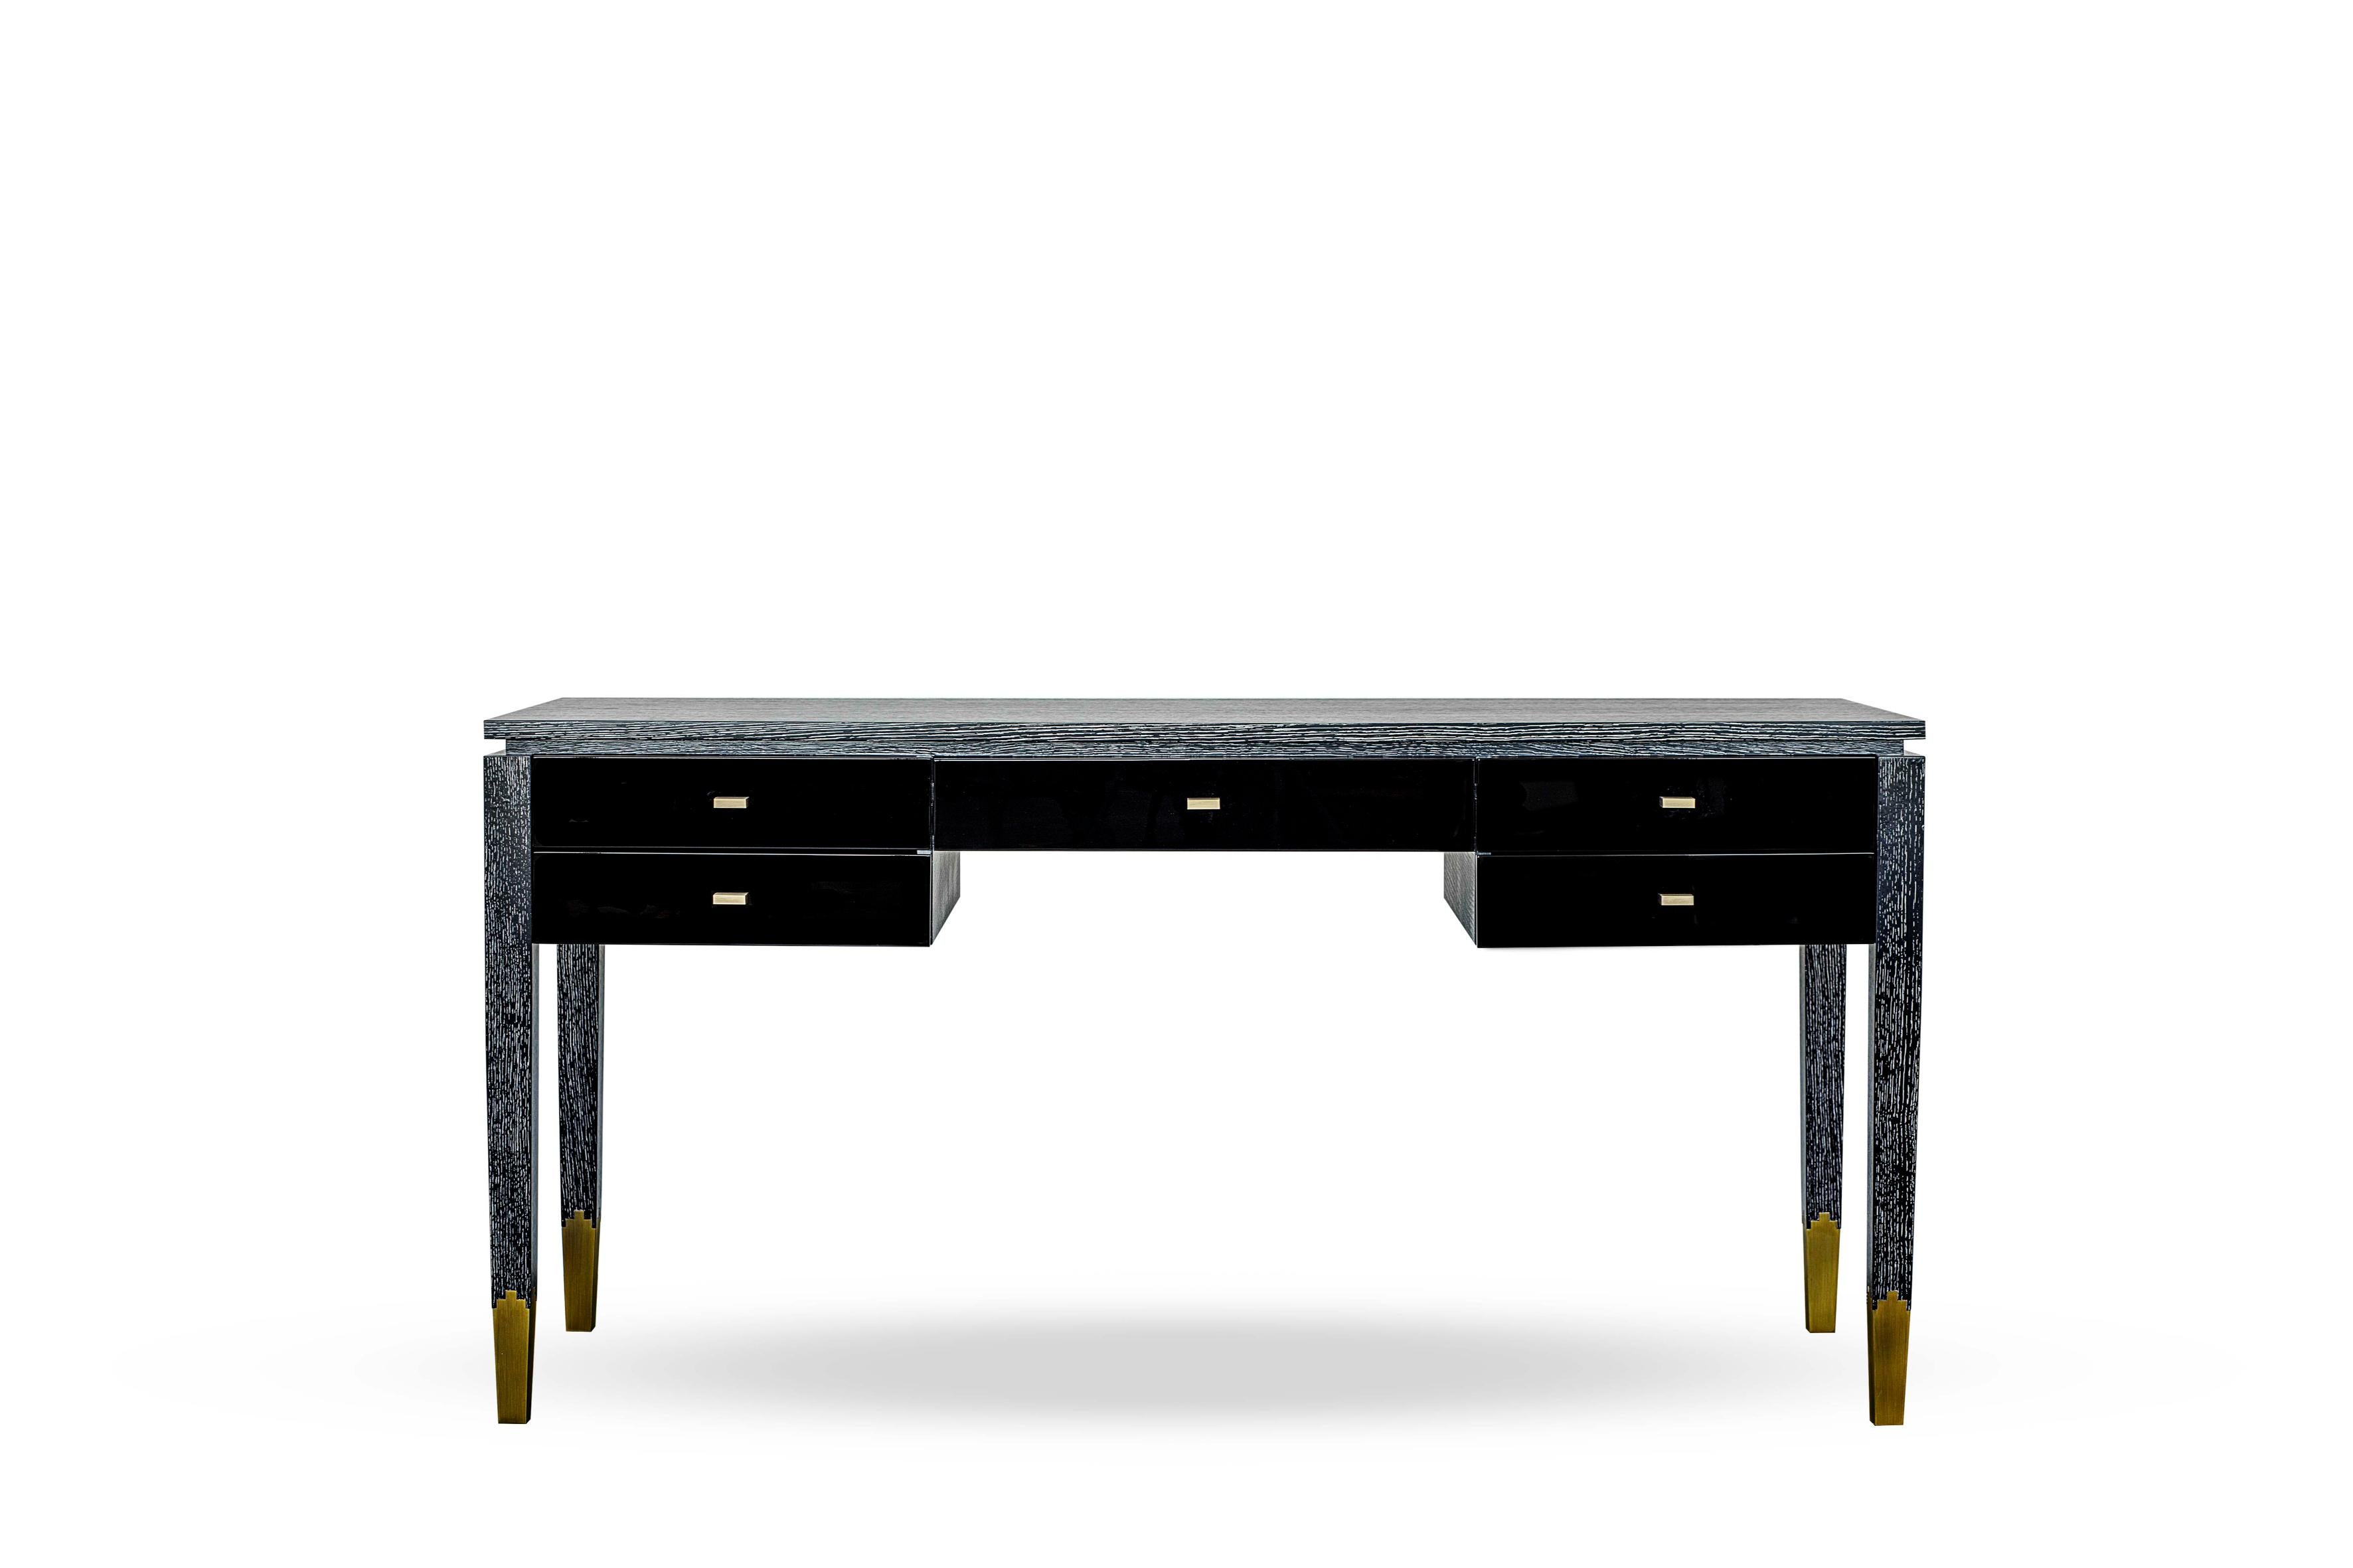 Anna Desk by DUISTT 
Dimensions: W 140 x D 70 x H 76 cm
Materials: Black Limed Oak, High Gloss Black Lacquered Wood and Brass

Anna is an elegant desk, crafted with great attention to details, that features a beautiful structure in oak with a limed